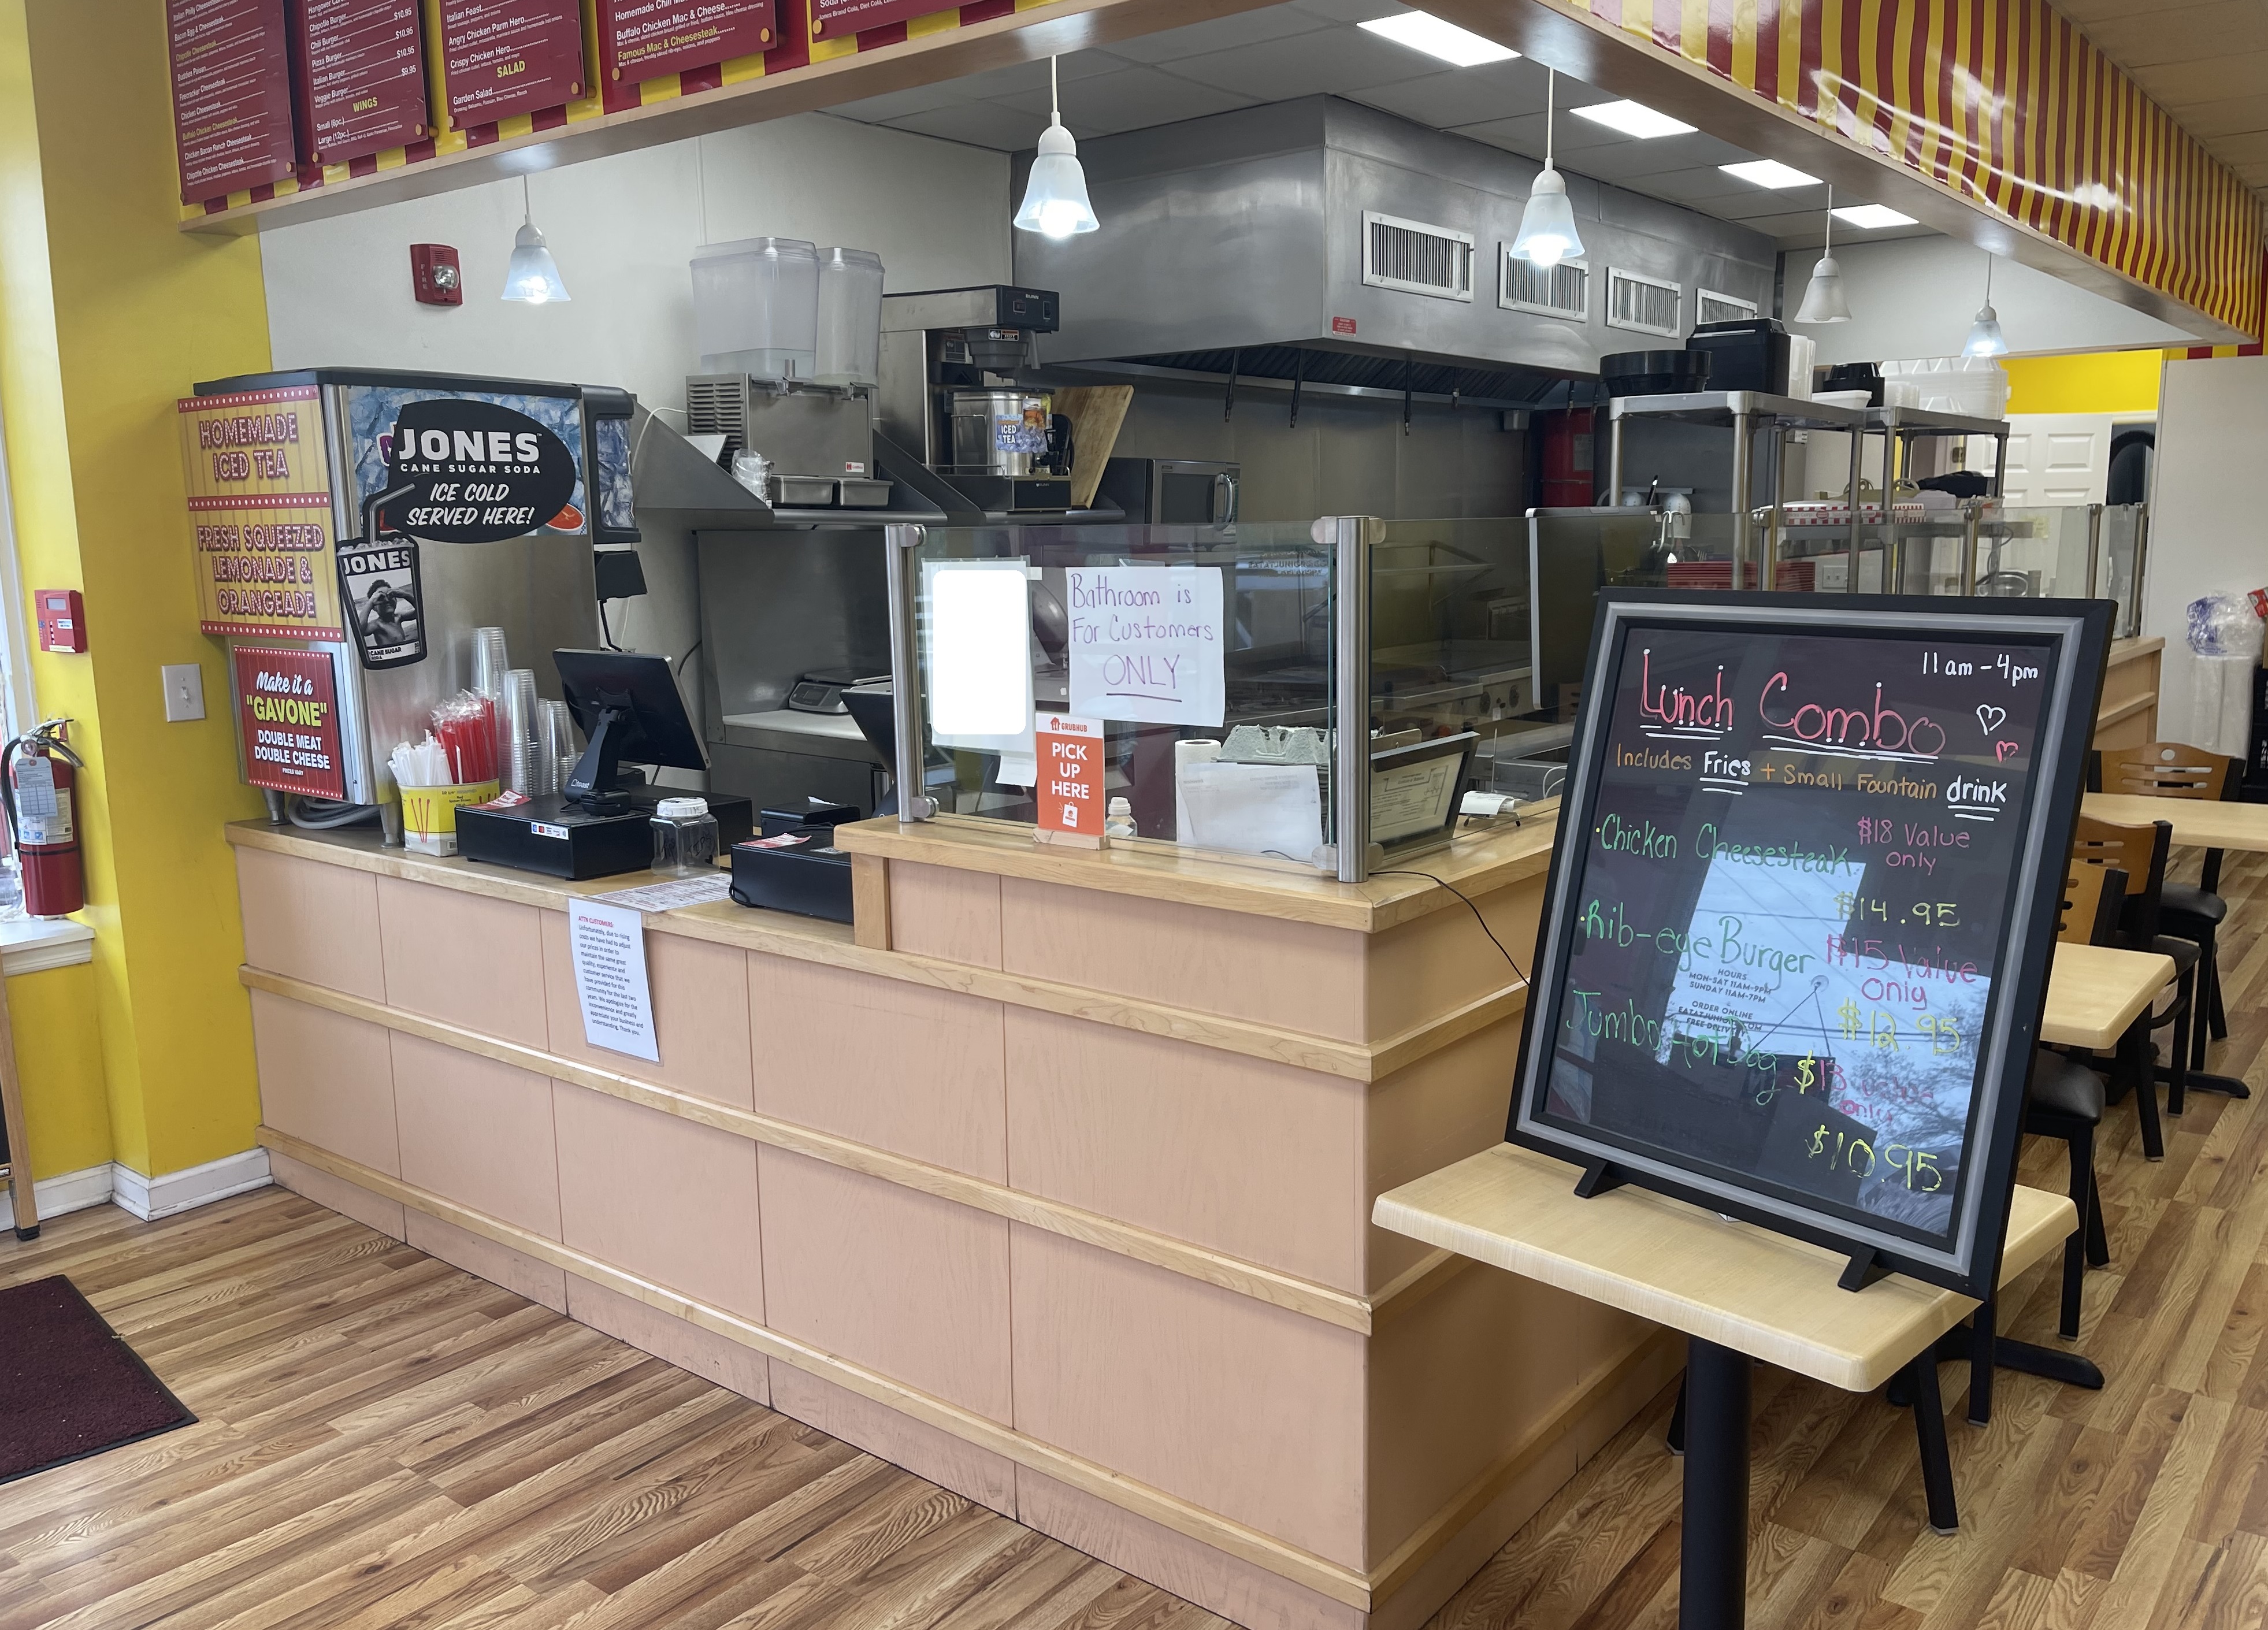 Cheesesteak Business for sale in NJ